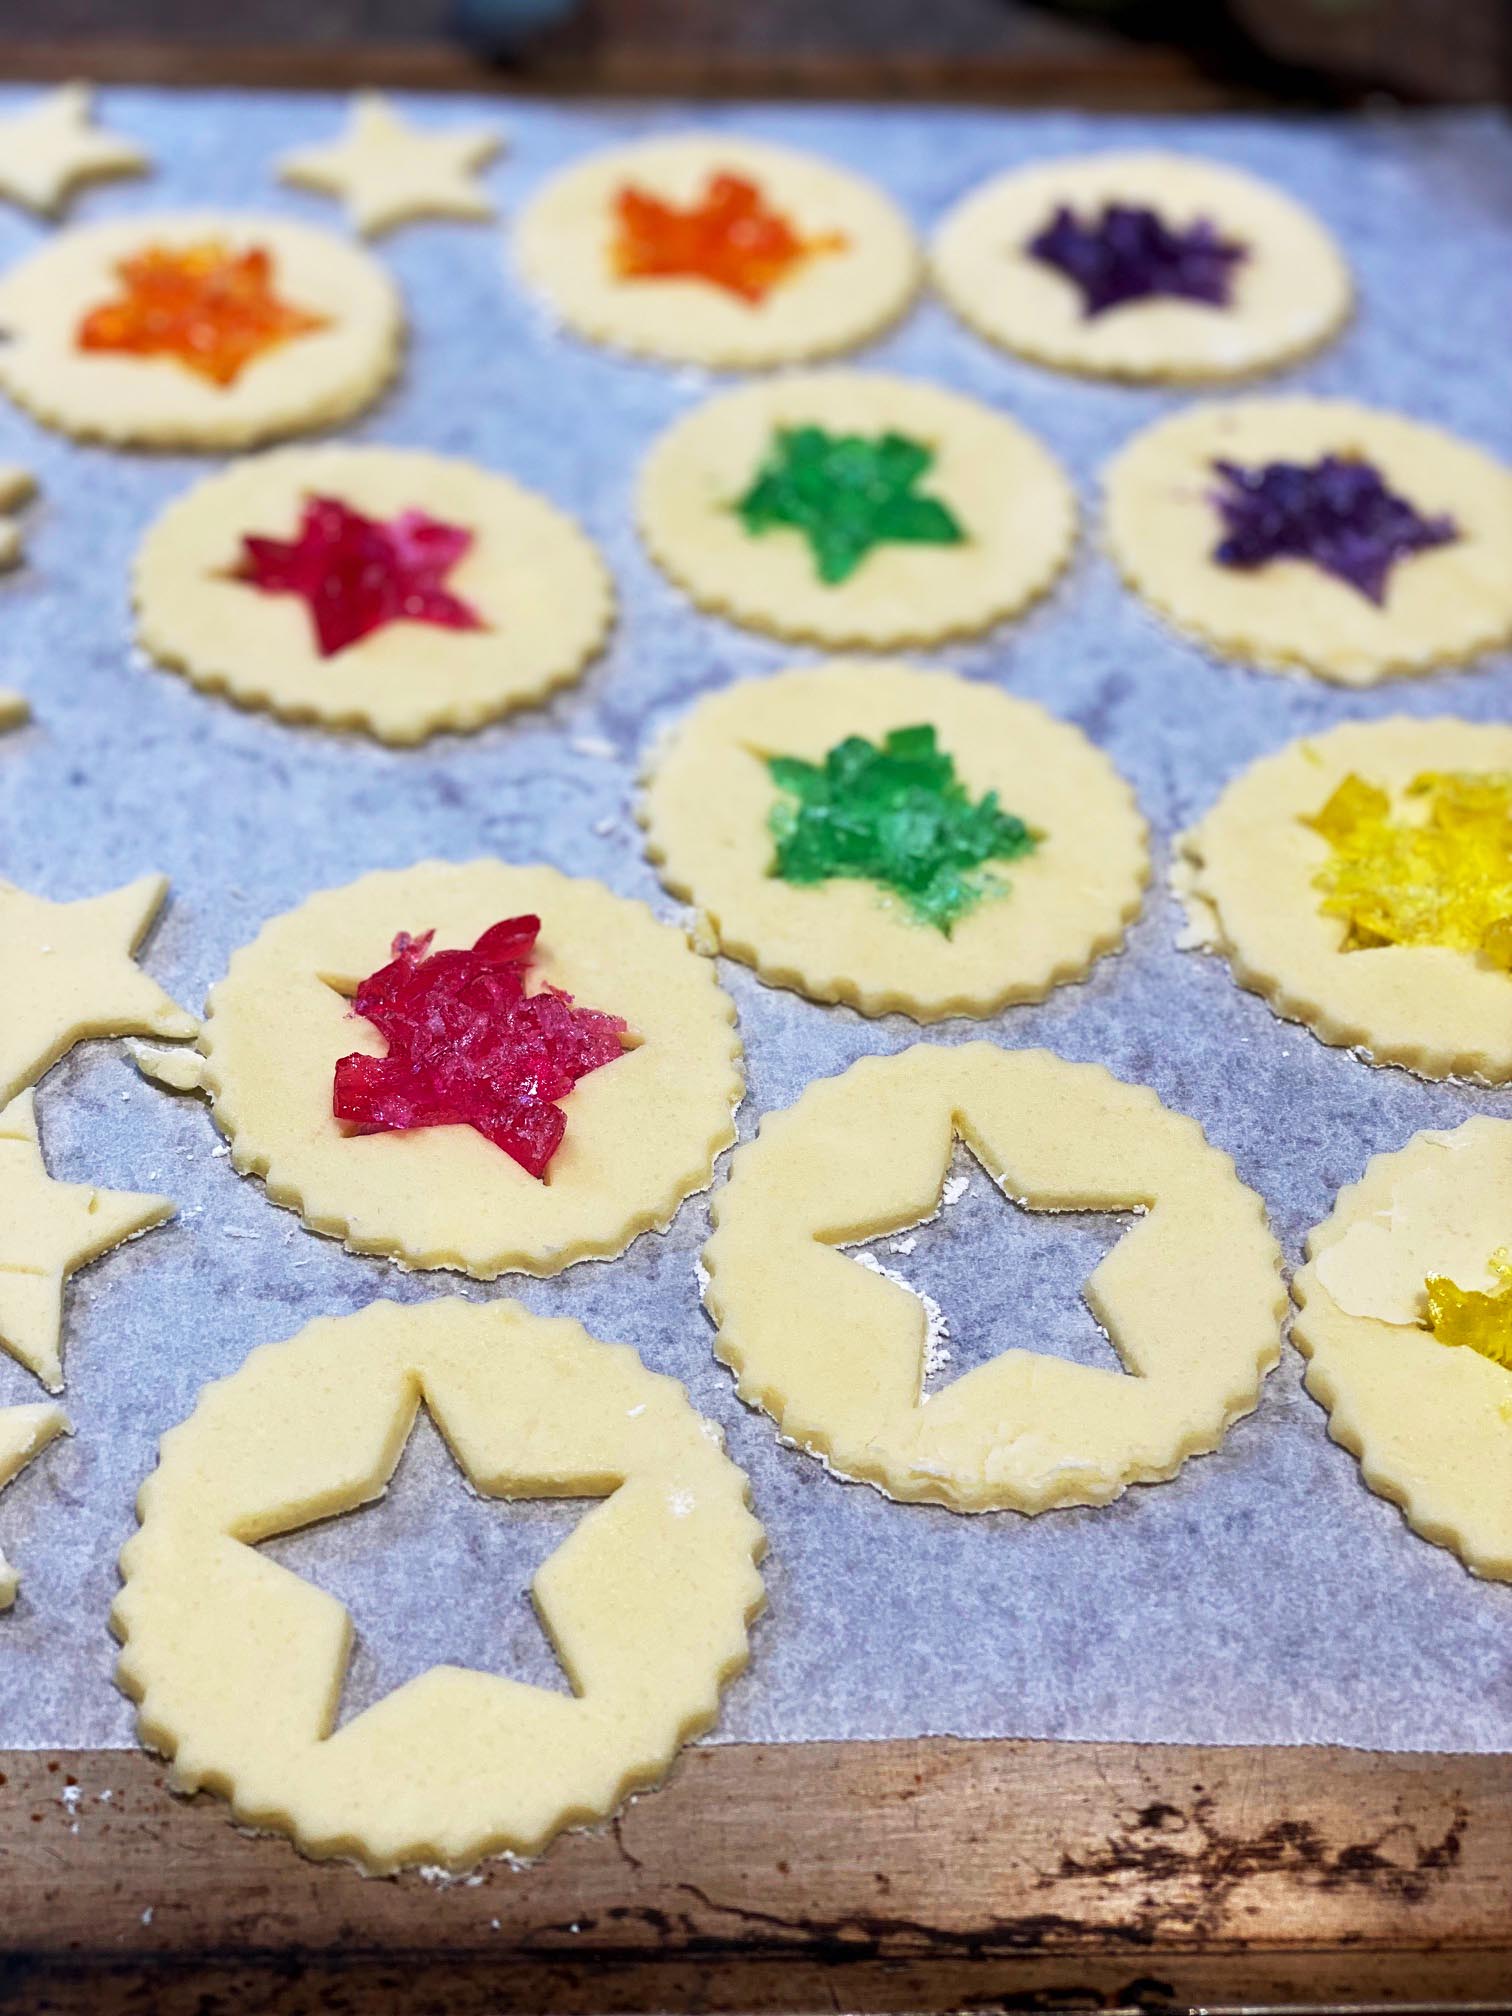 Round biscuits with star cut outs and colourful crushed candy in the middle